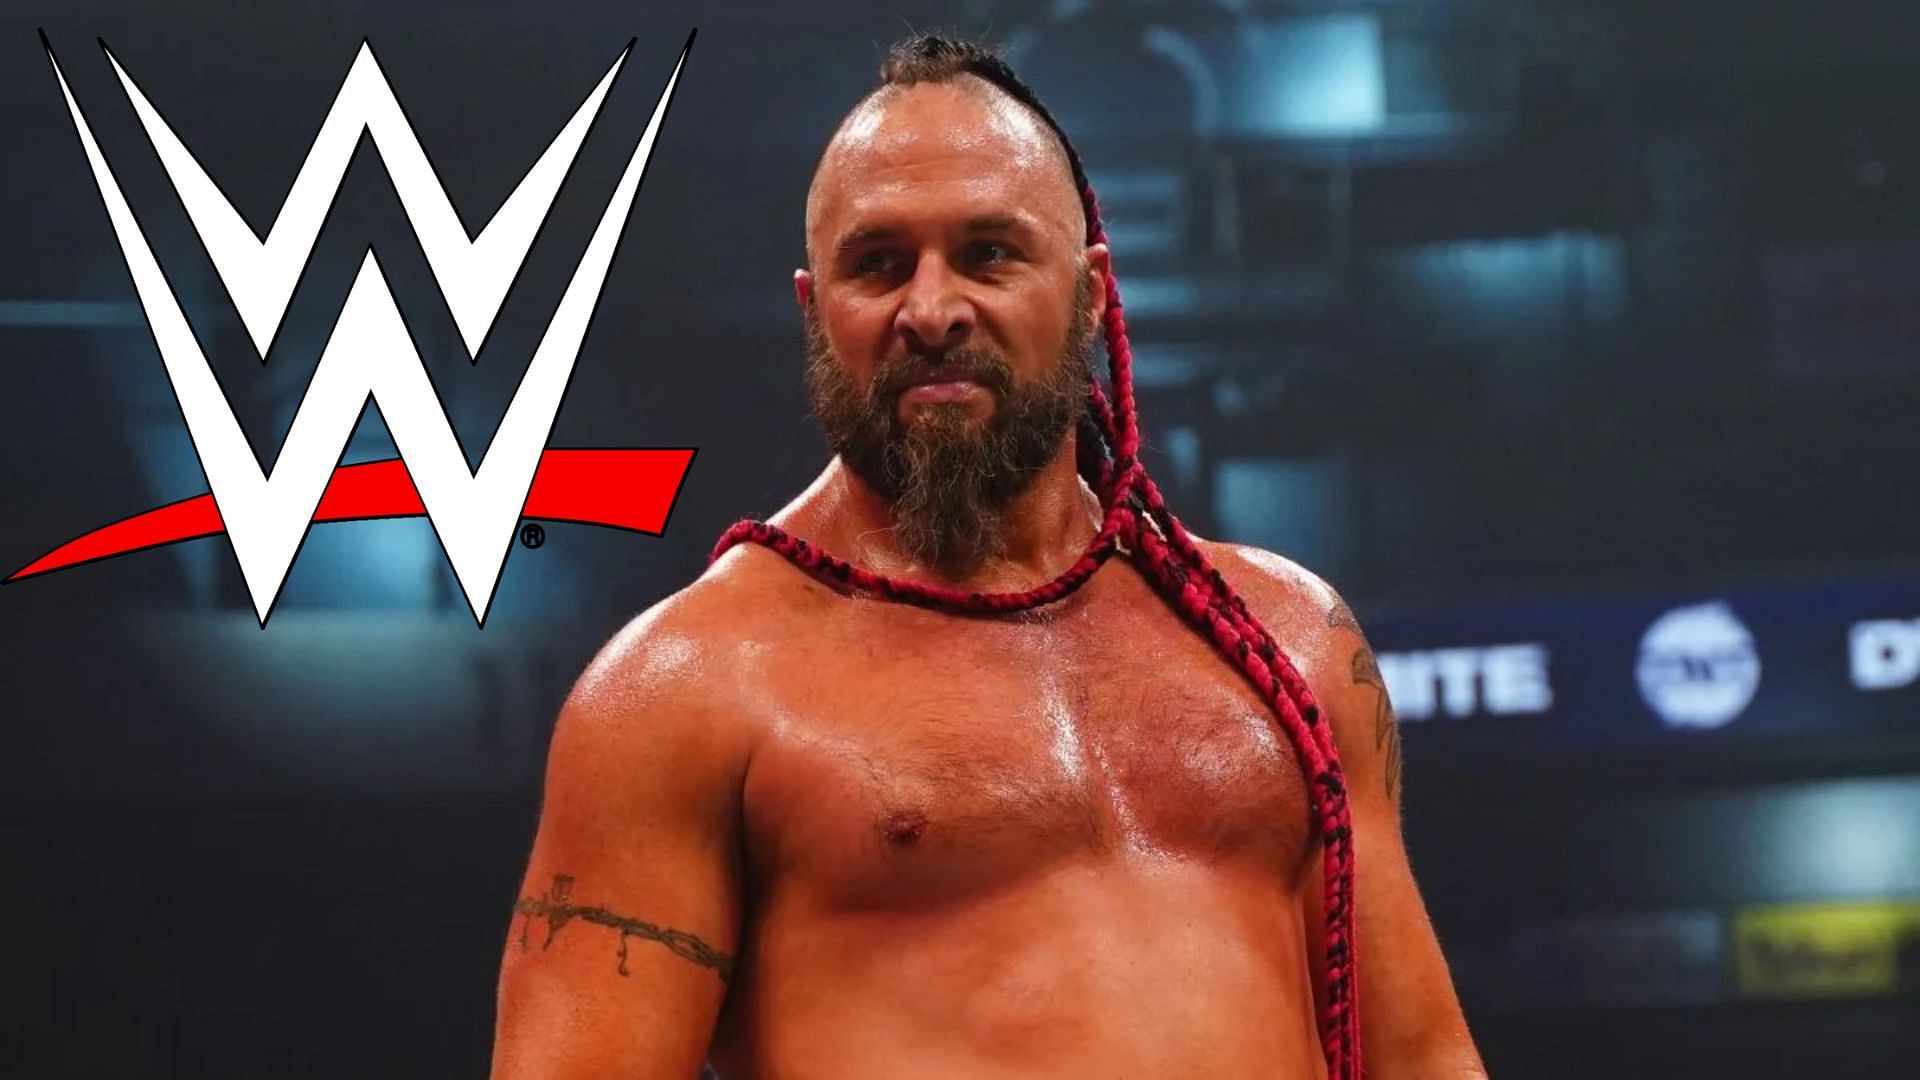 Could this WWE legend return to aid Lance Archer soon?